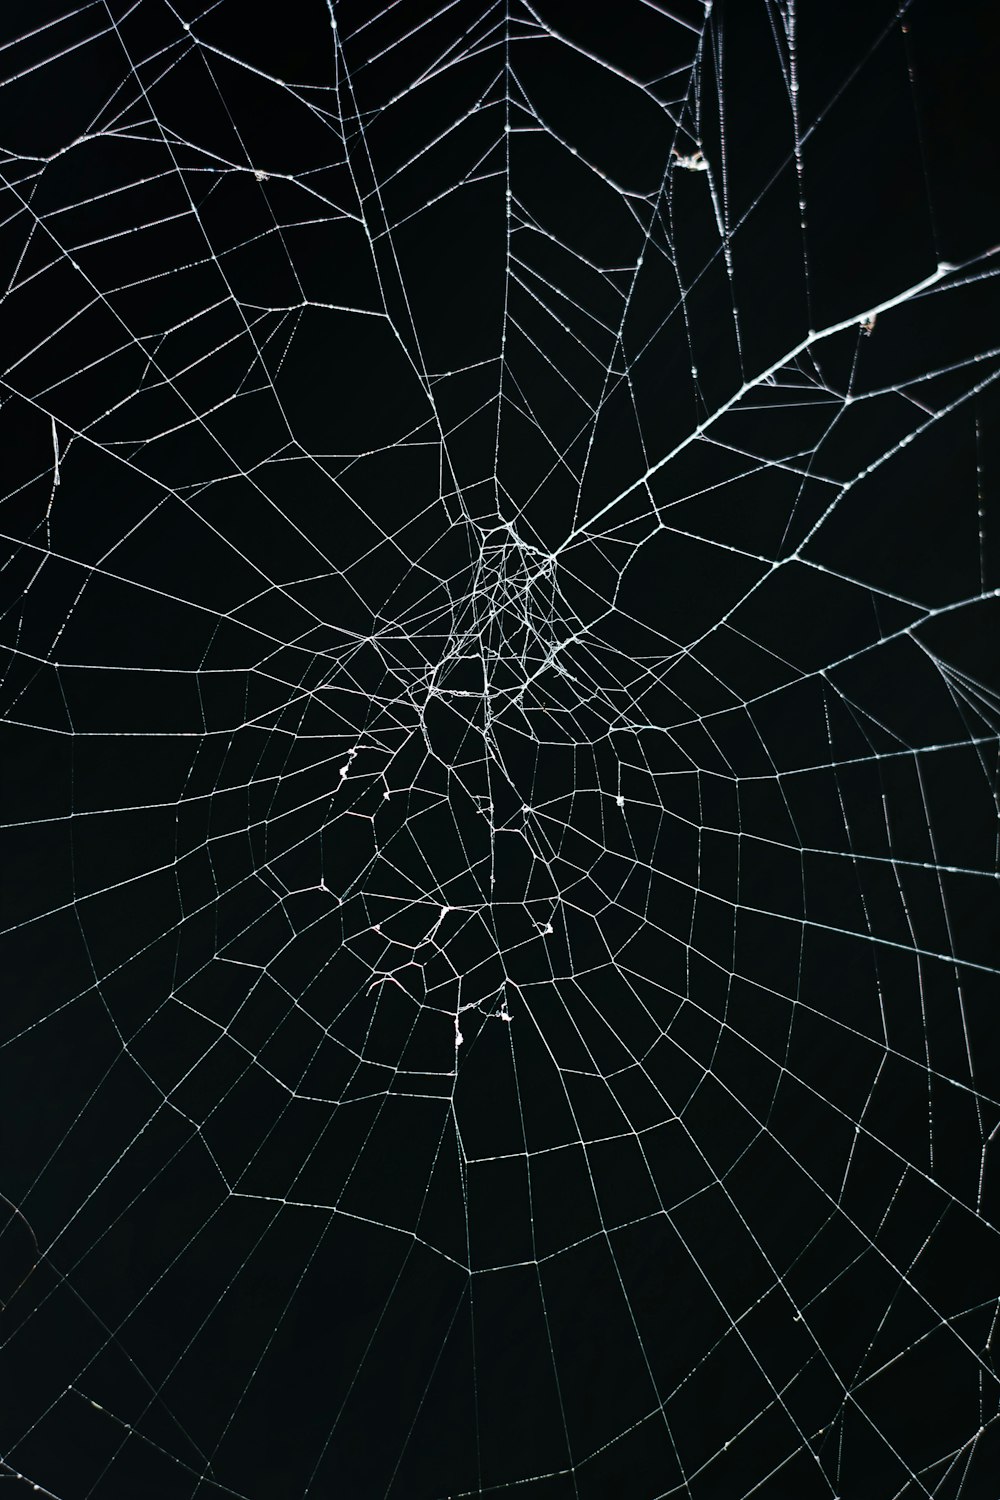 a close up of a spider web on a black background